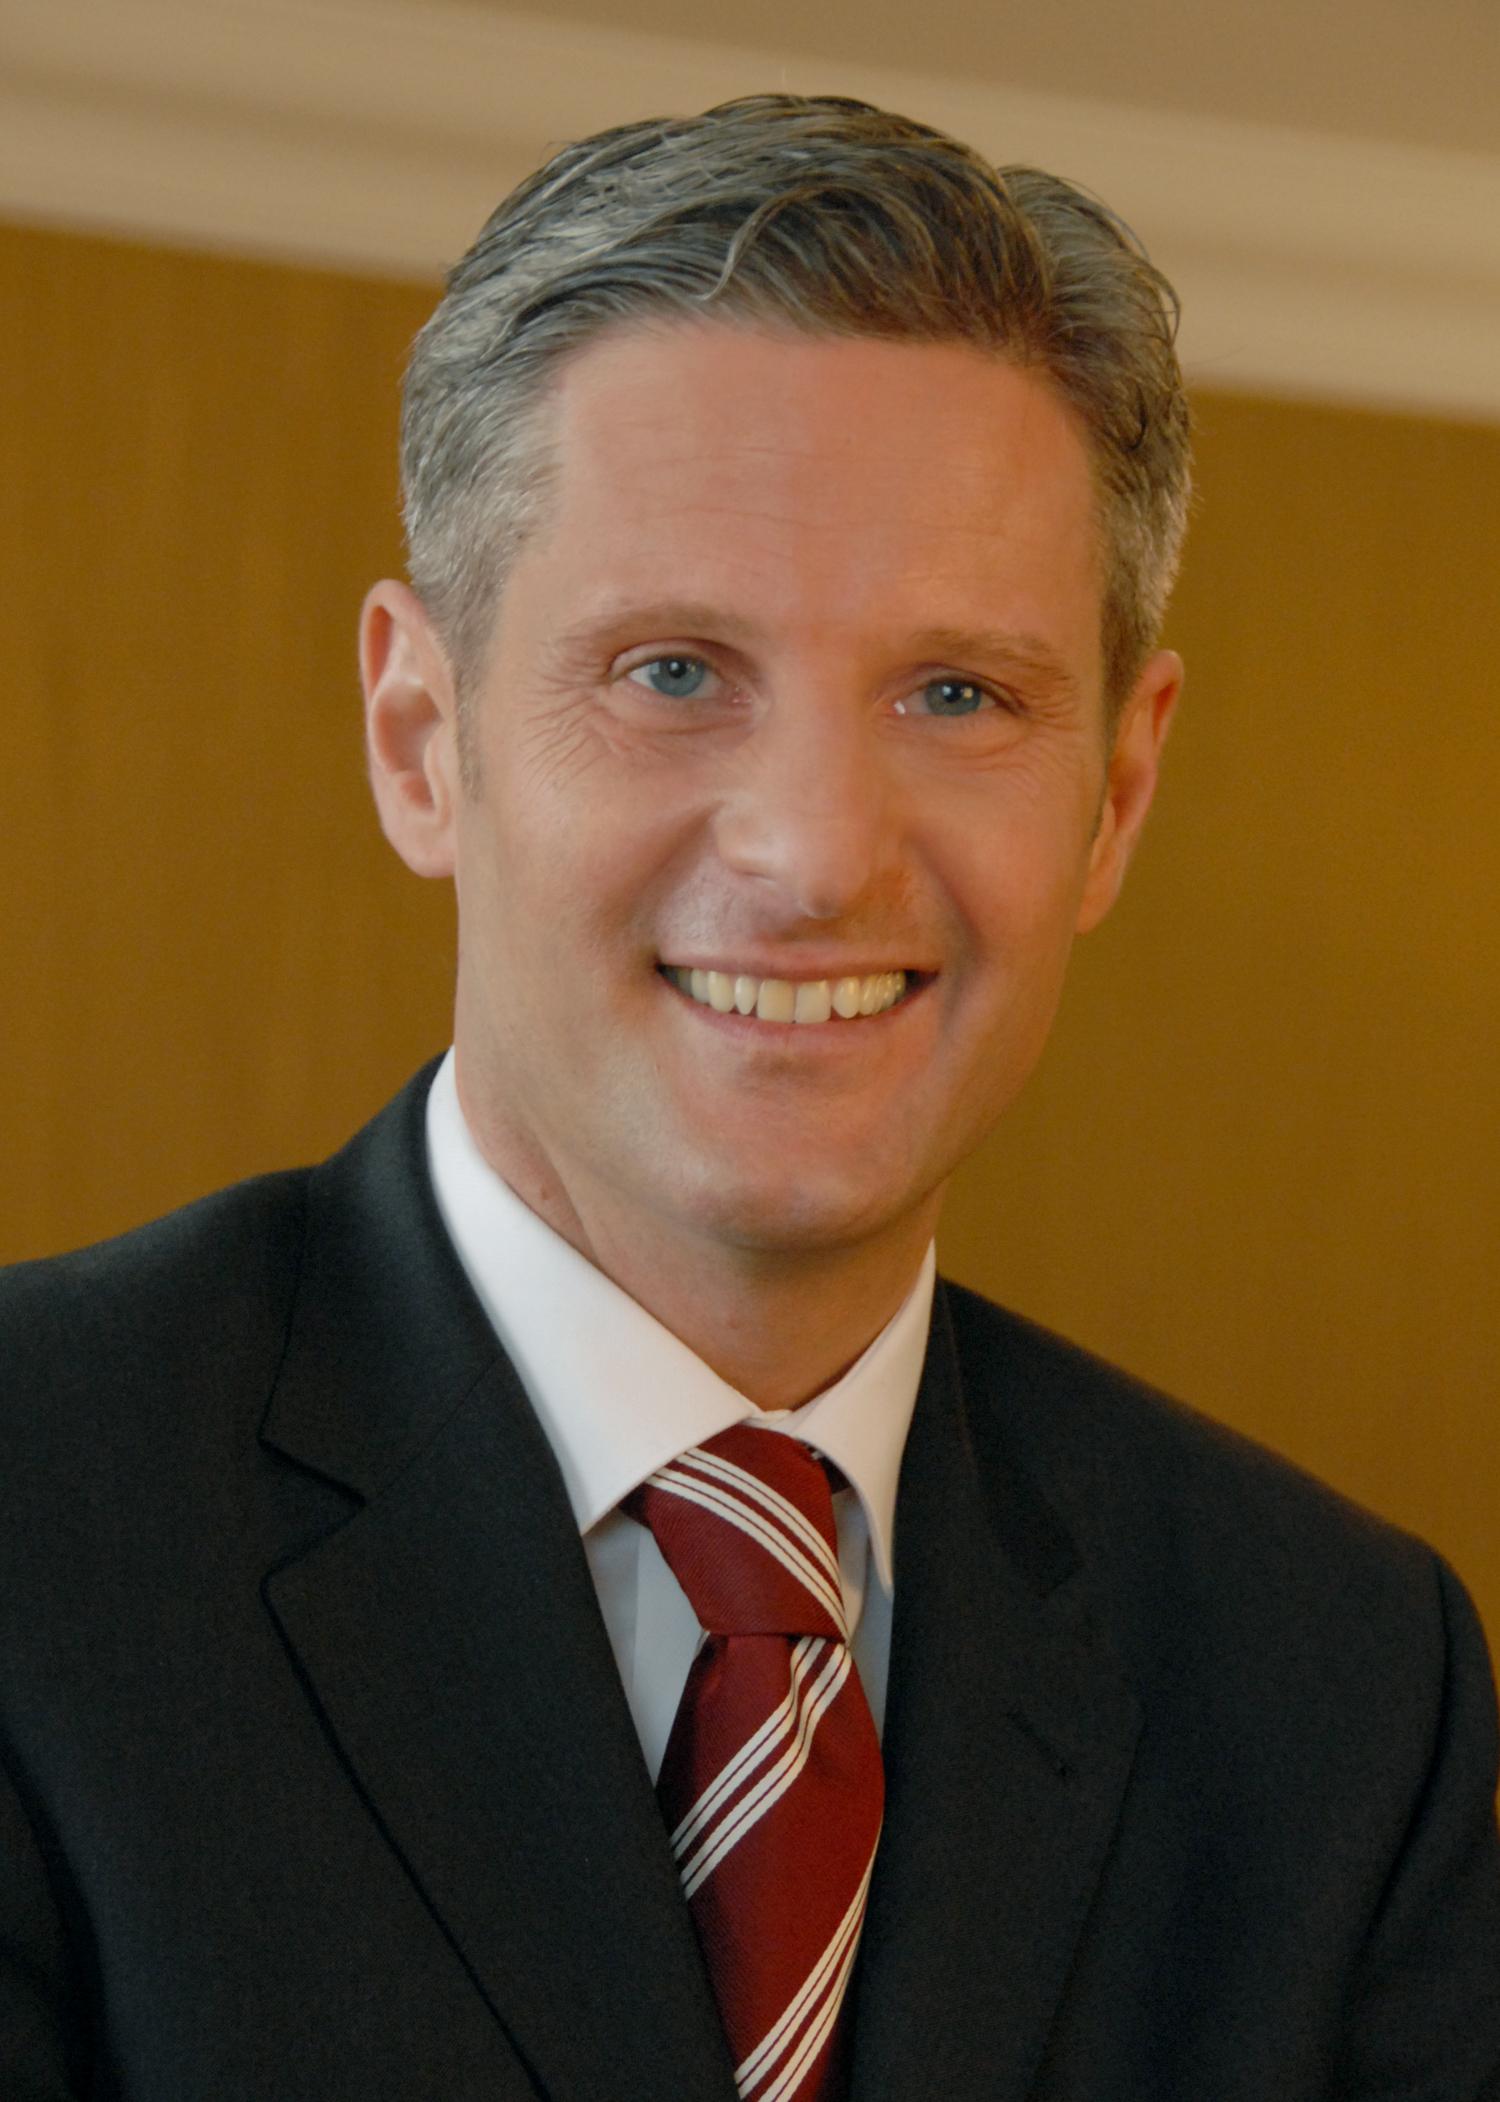 Press Release: New General Manager At InterContinental Budapest